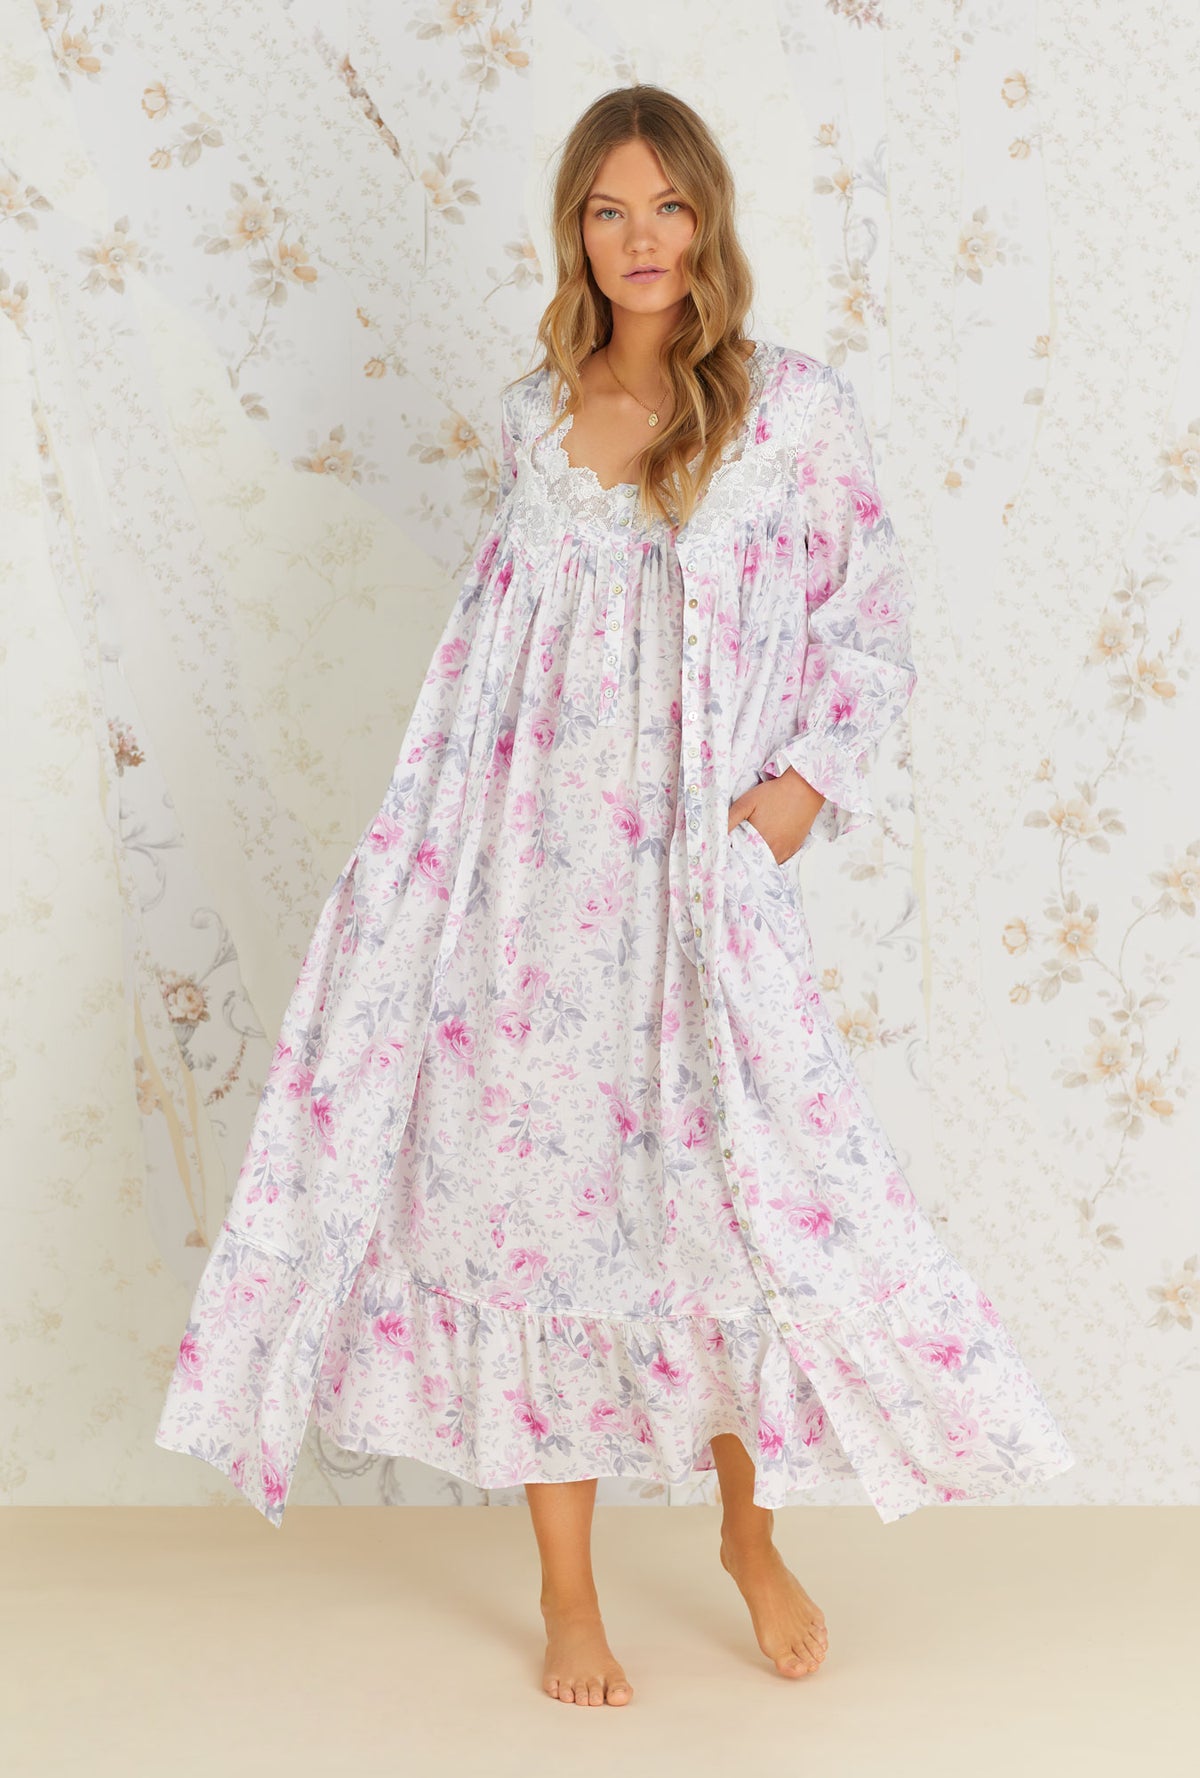 A lady wearing white sleeveless cotton nightgown with mendocino rose print.